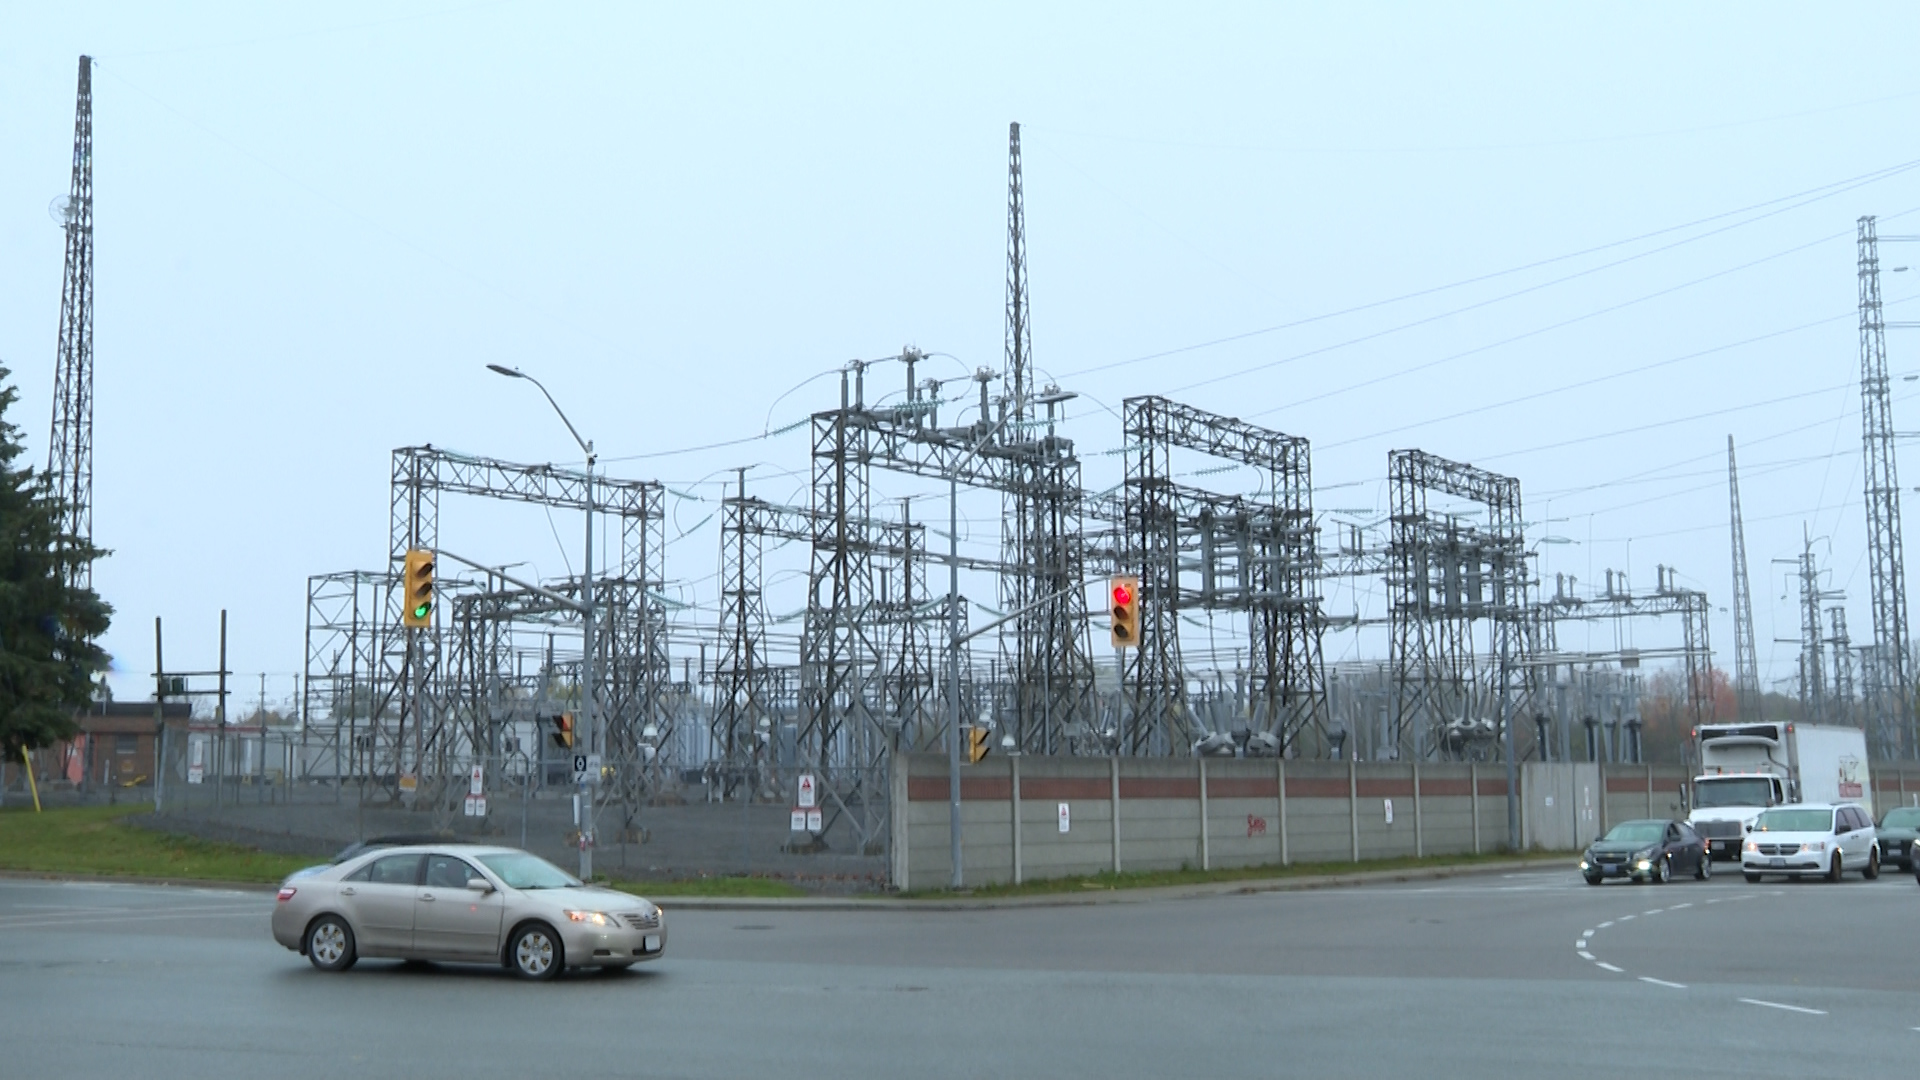 Large power outage in Kingston, Ont. caused by trespasser: police